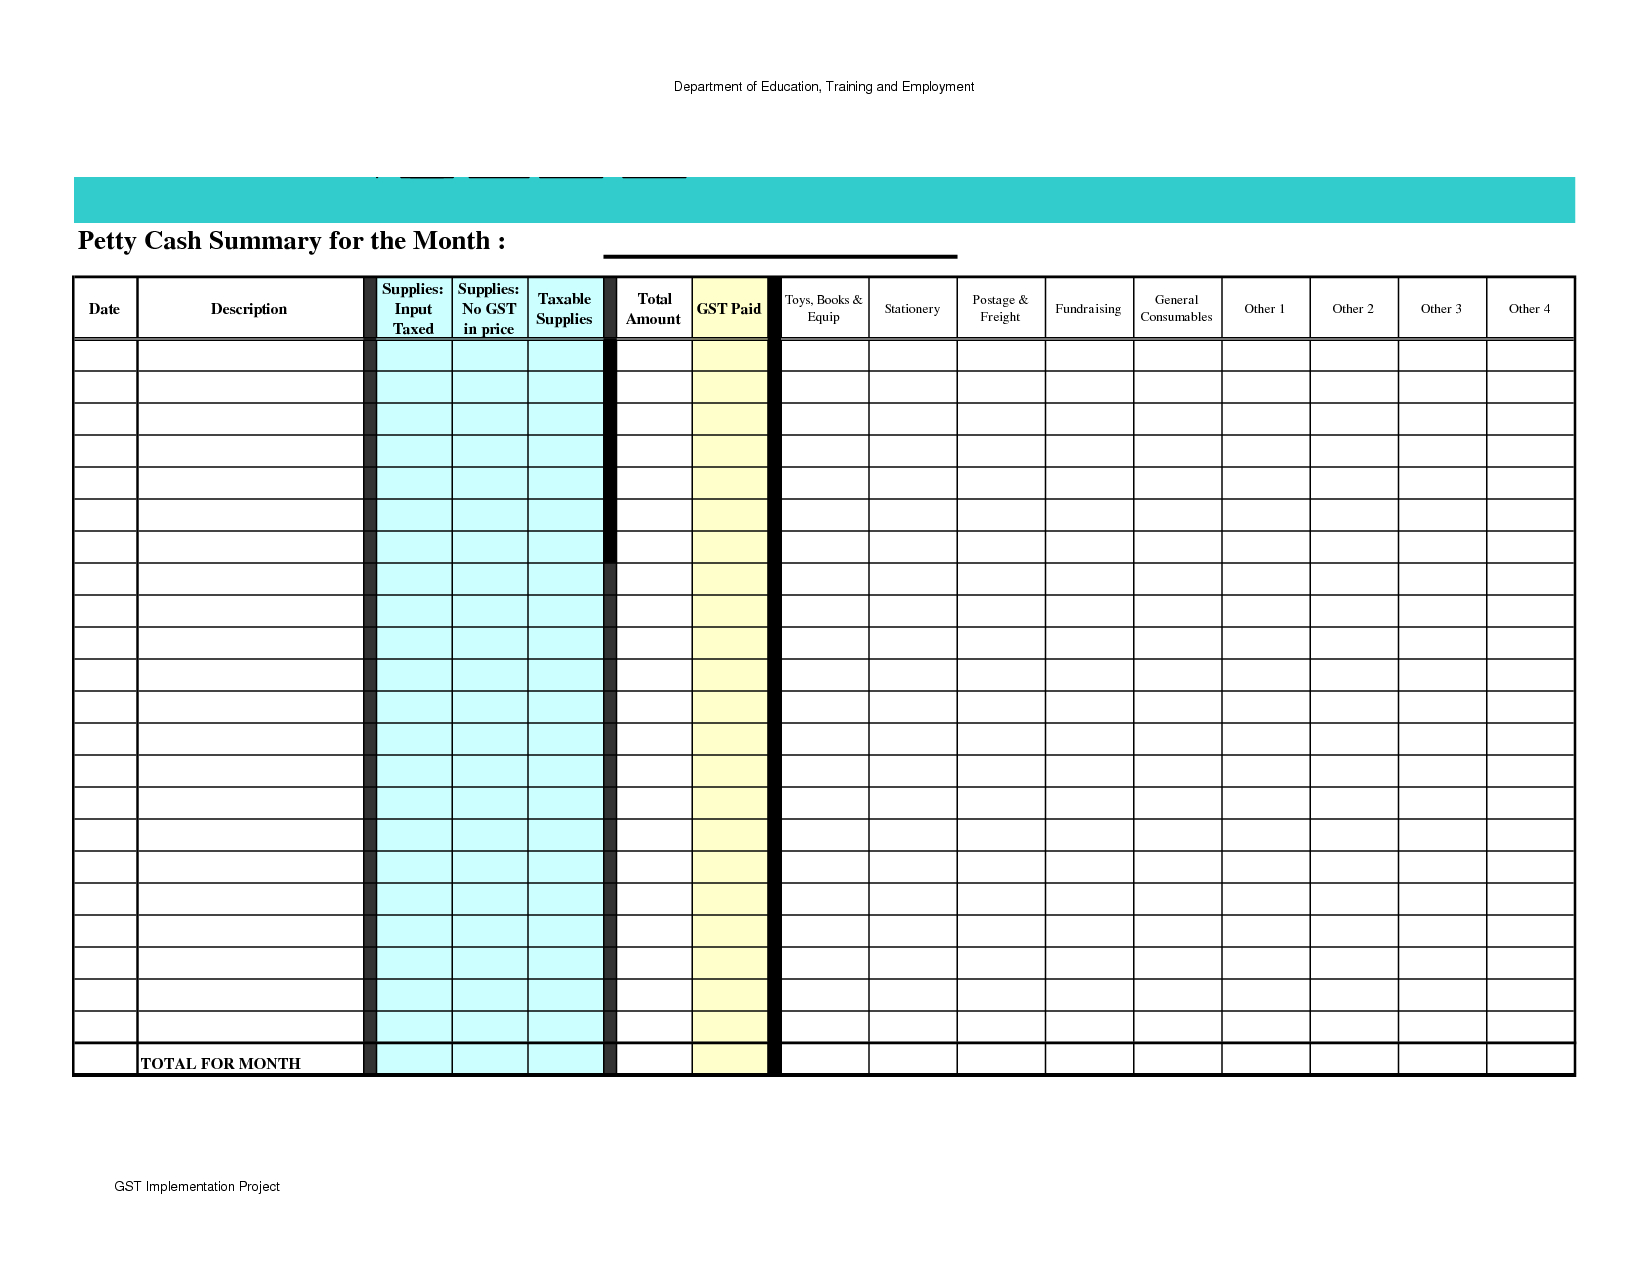 Petty Cash Spreadsheet Template Excel | Petty Cash Expences Inside Expense Report Spreadsheet Template Excel